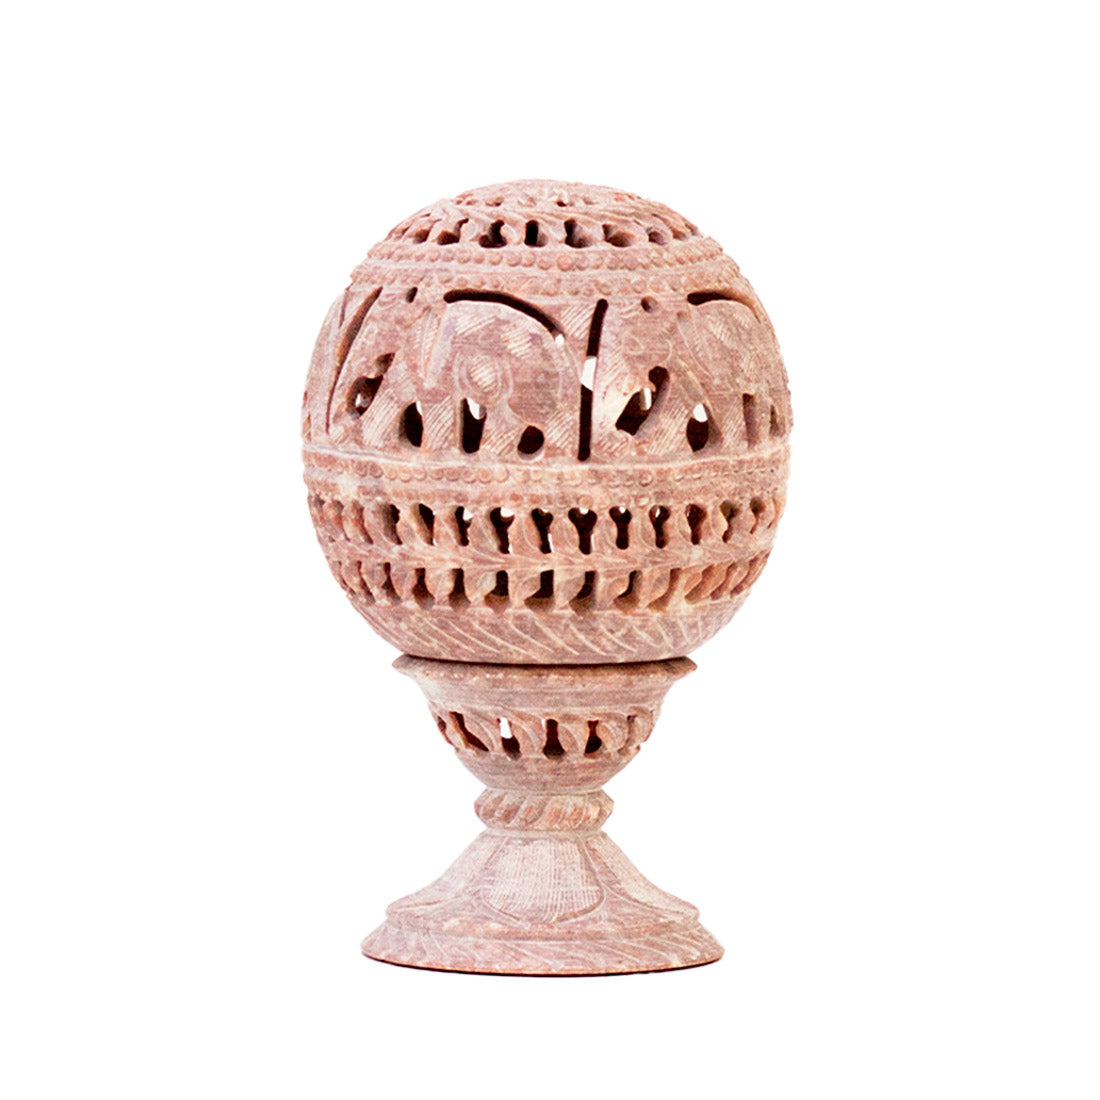 Gardenia Soapstone Candle Stand with Floral Lattice Work and Motifs